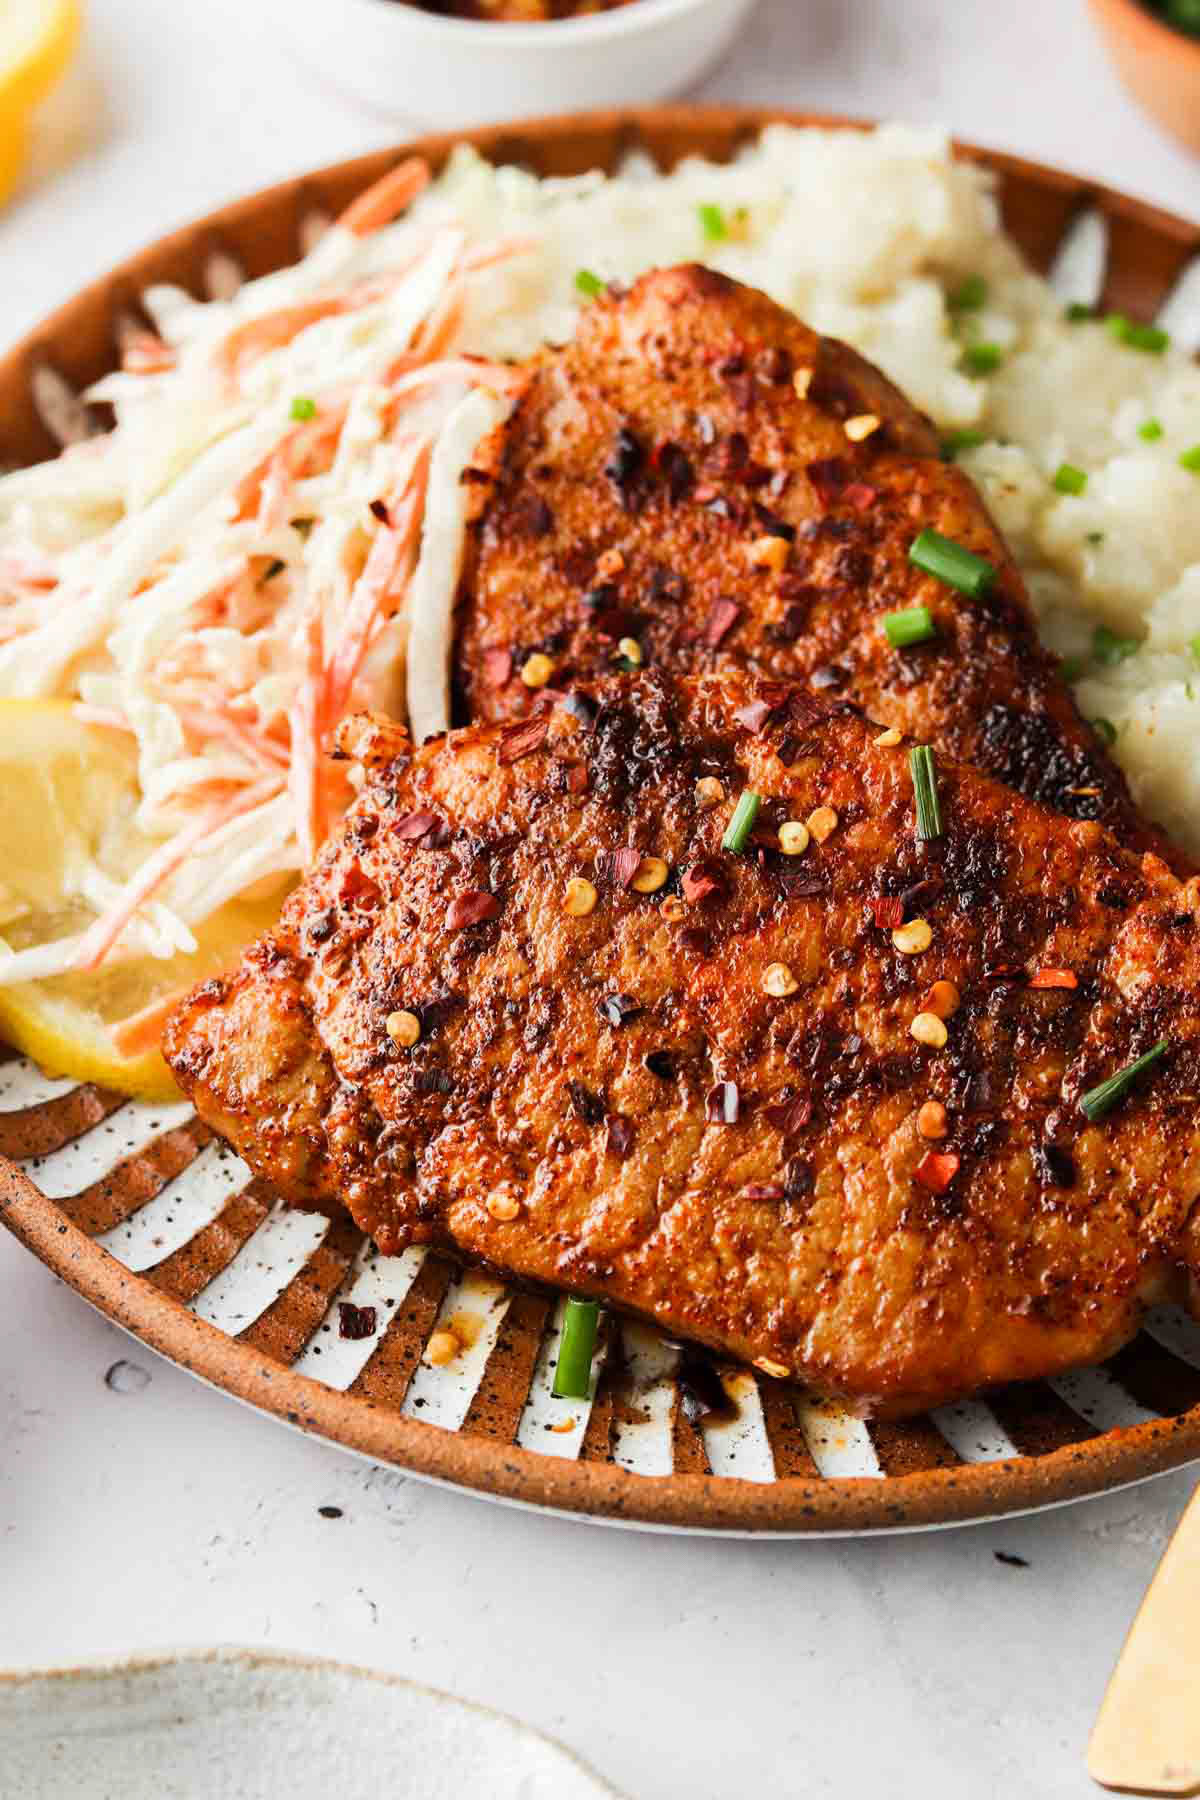 Blackened pork chops on a plate with coleslaw.